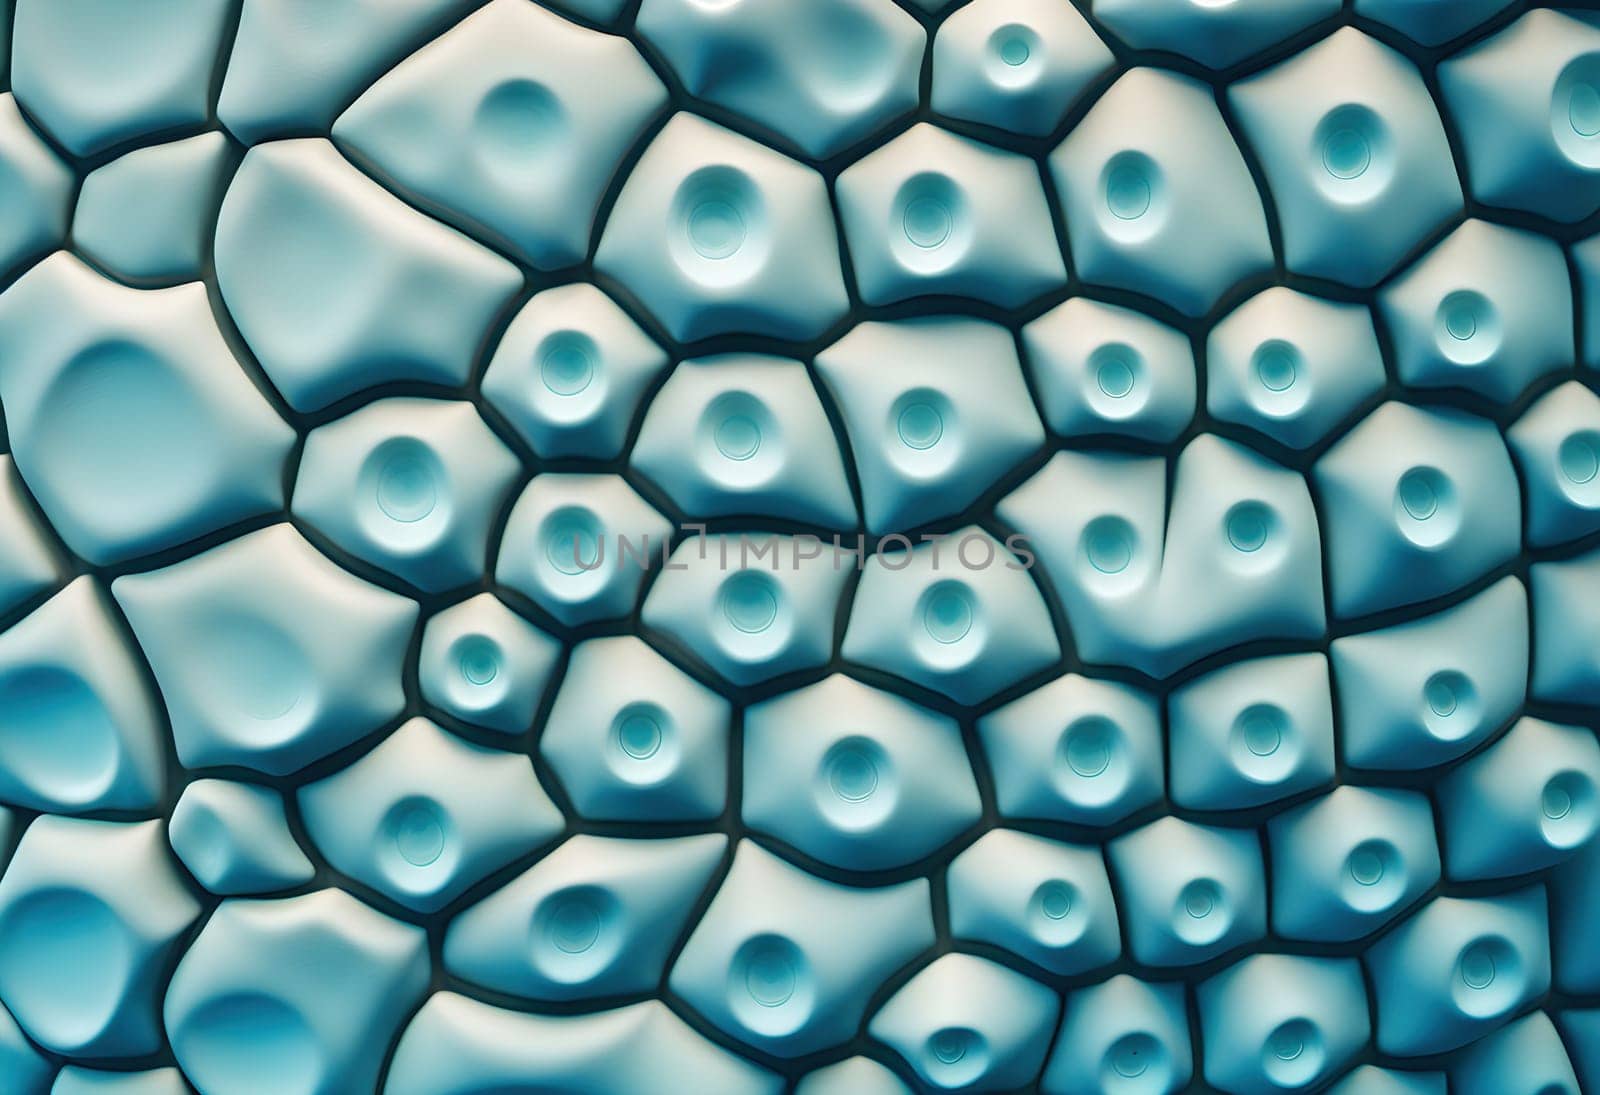 close up of wall with dimpled pattern complex patterns biomorph light blue gradient by rostik924